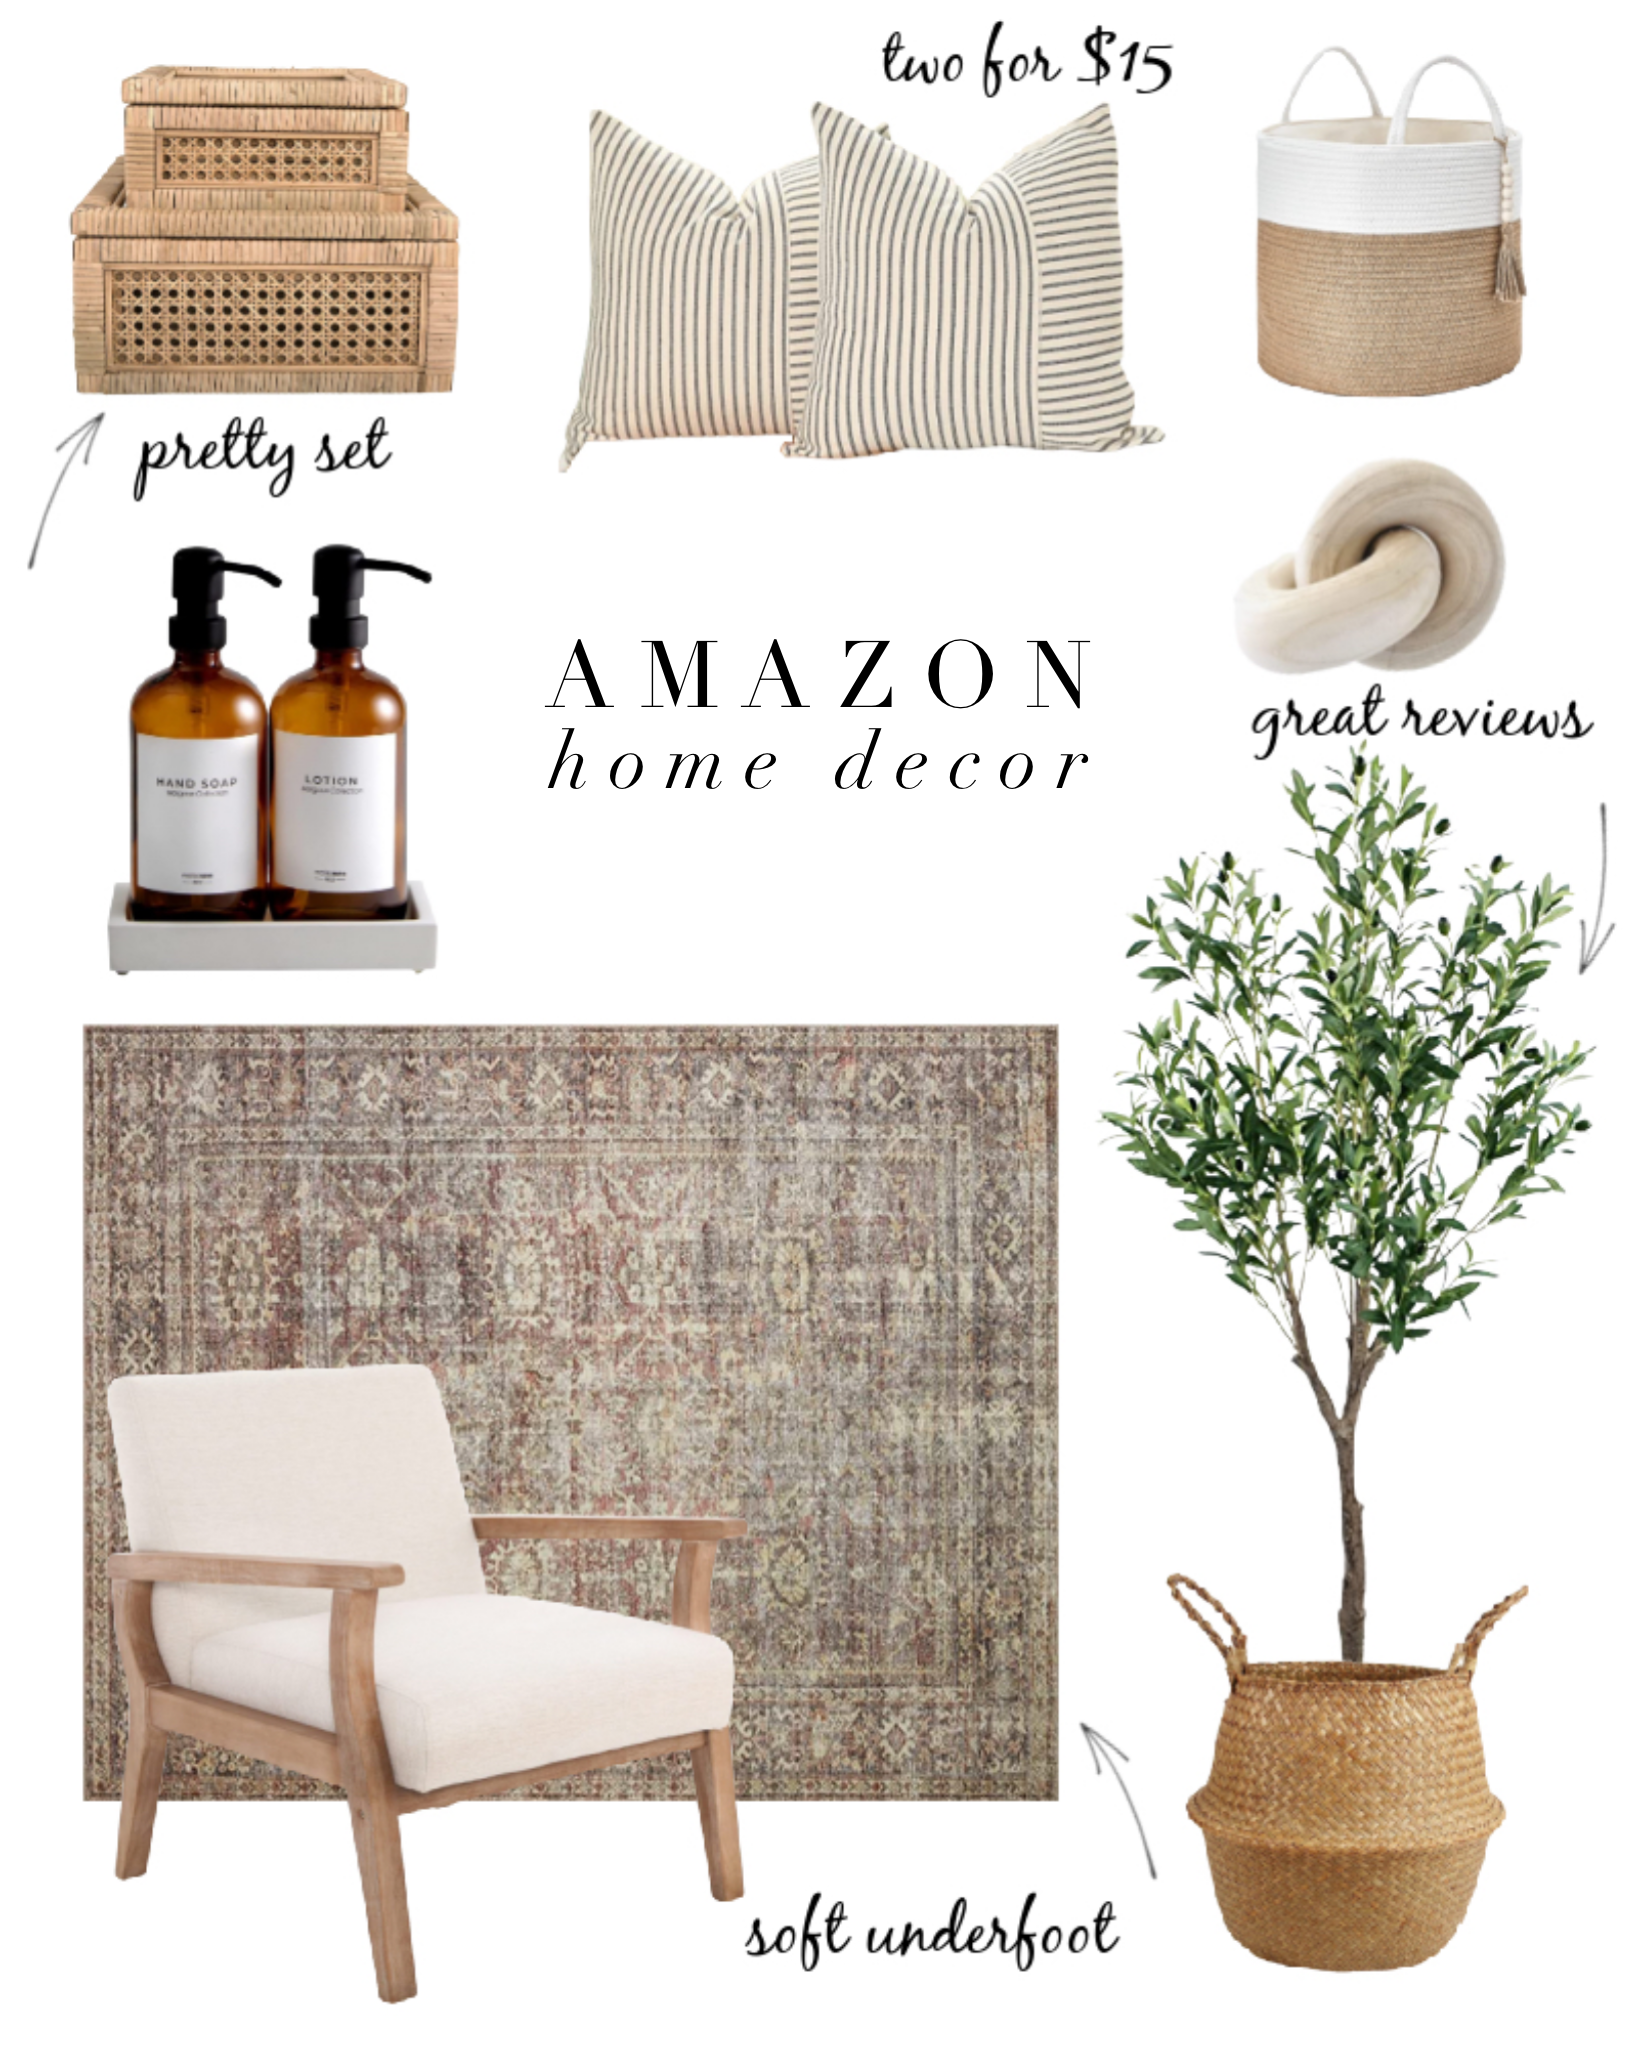 Favorite  Home Finds Under $100 - A Thoughtful Place